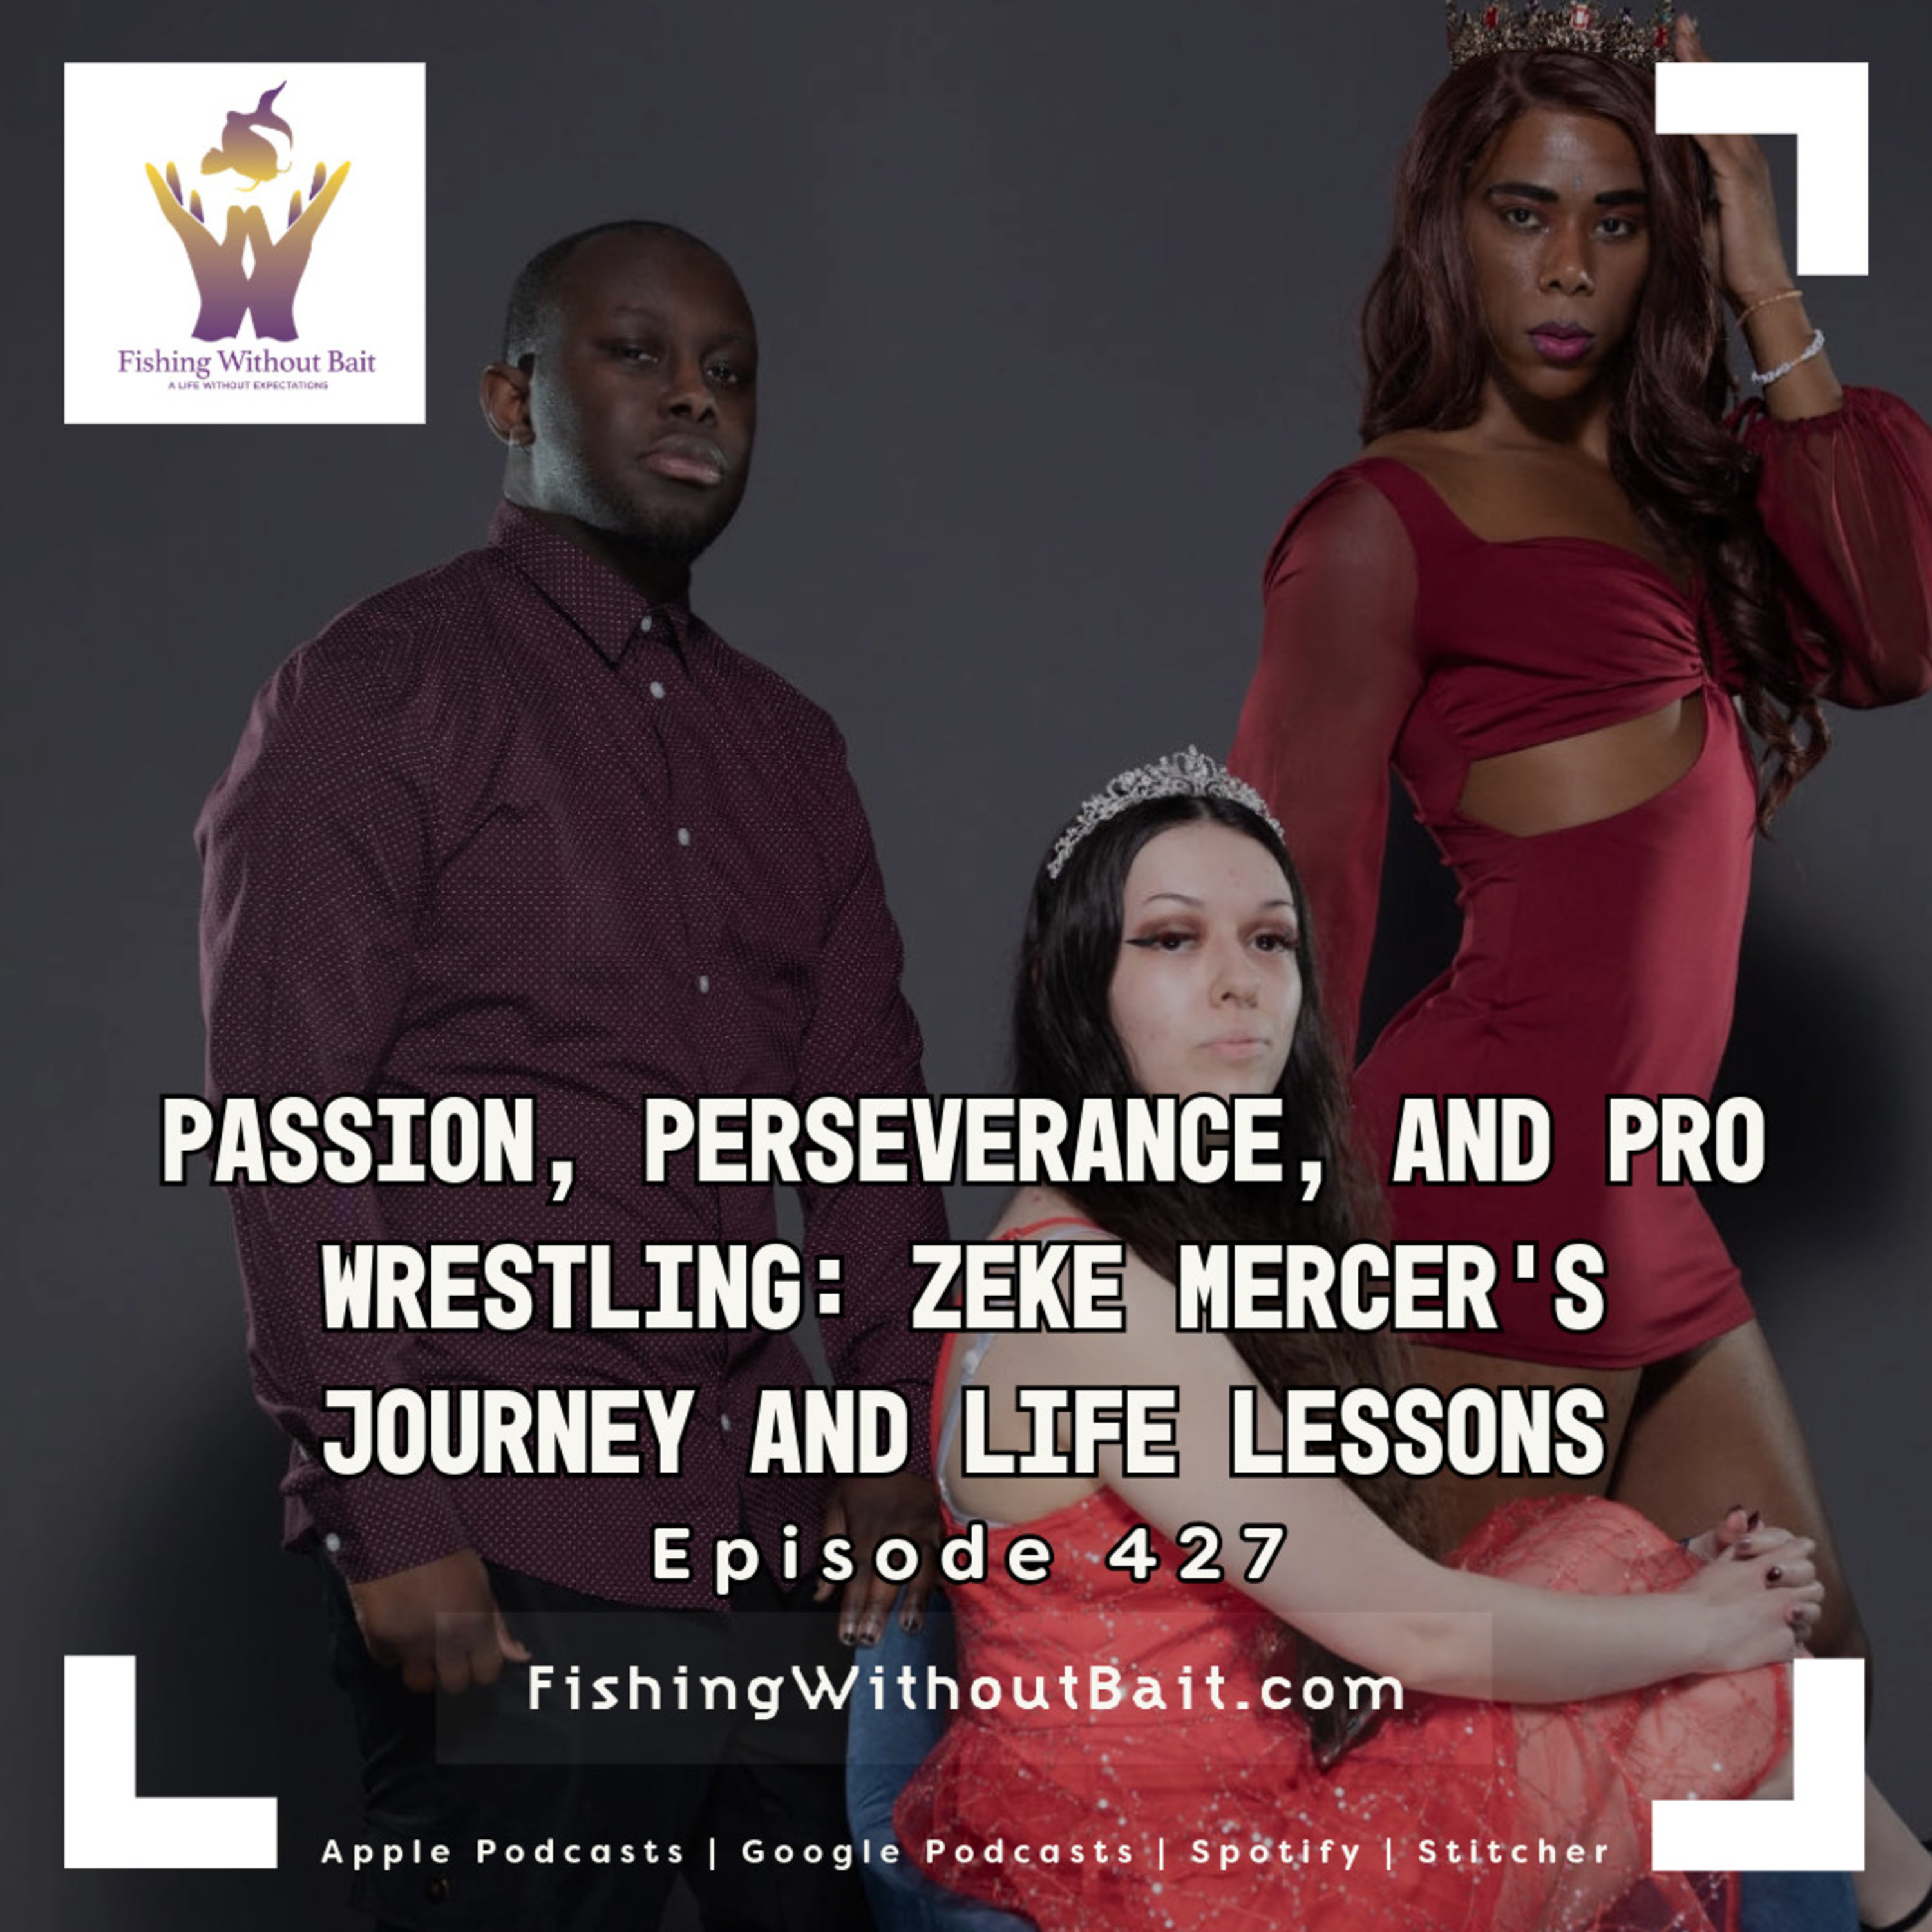 Passion, Perseverance, and Pro Wrestling: Zeke Mercer’s Journey and Life Lessons | Episode 427